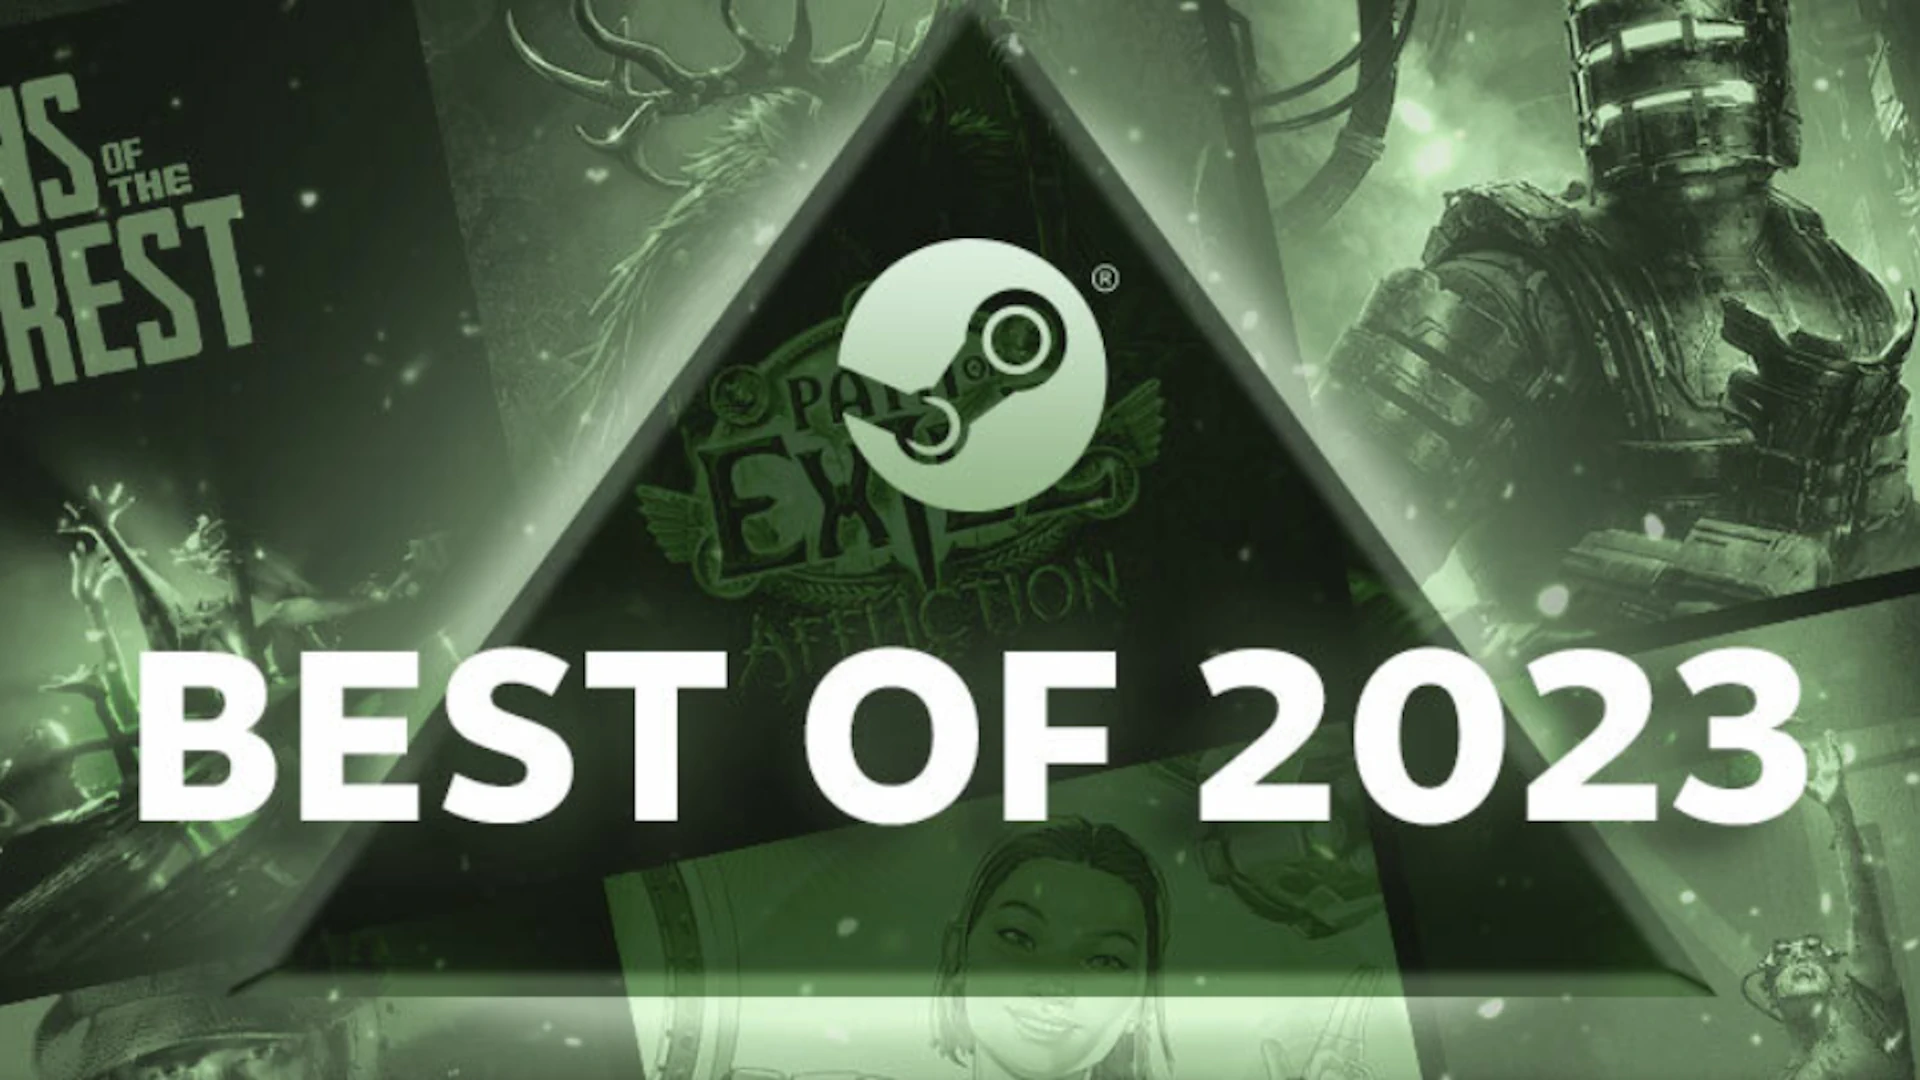 The best Steam games in 2023 released in the annual Valve list